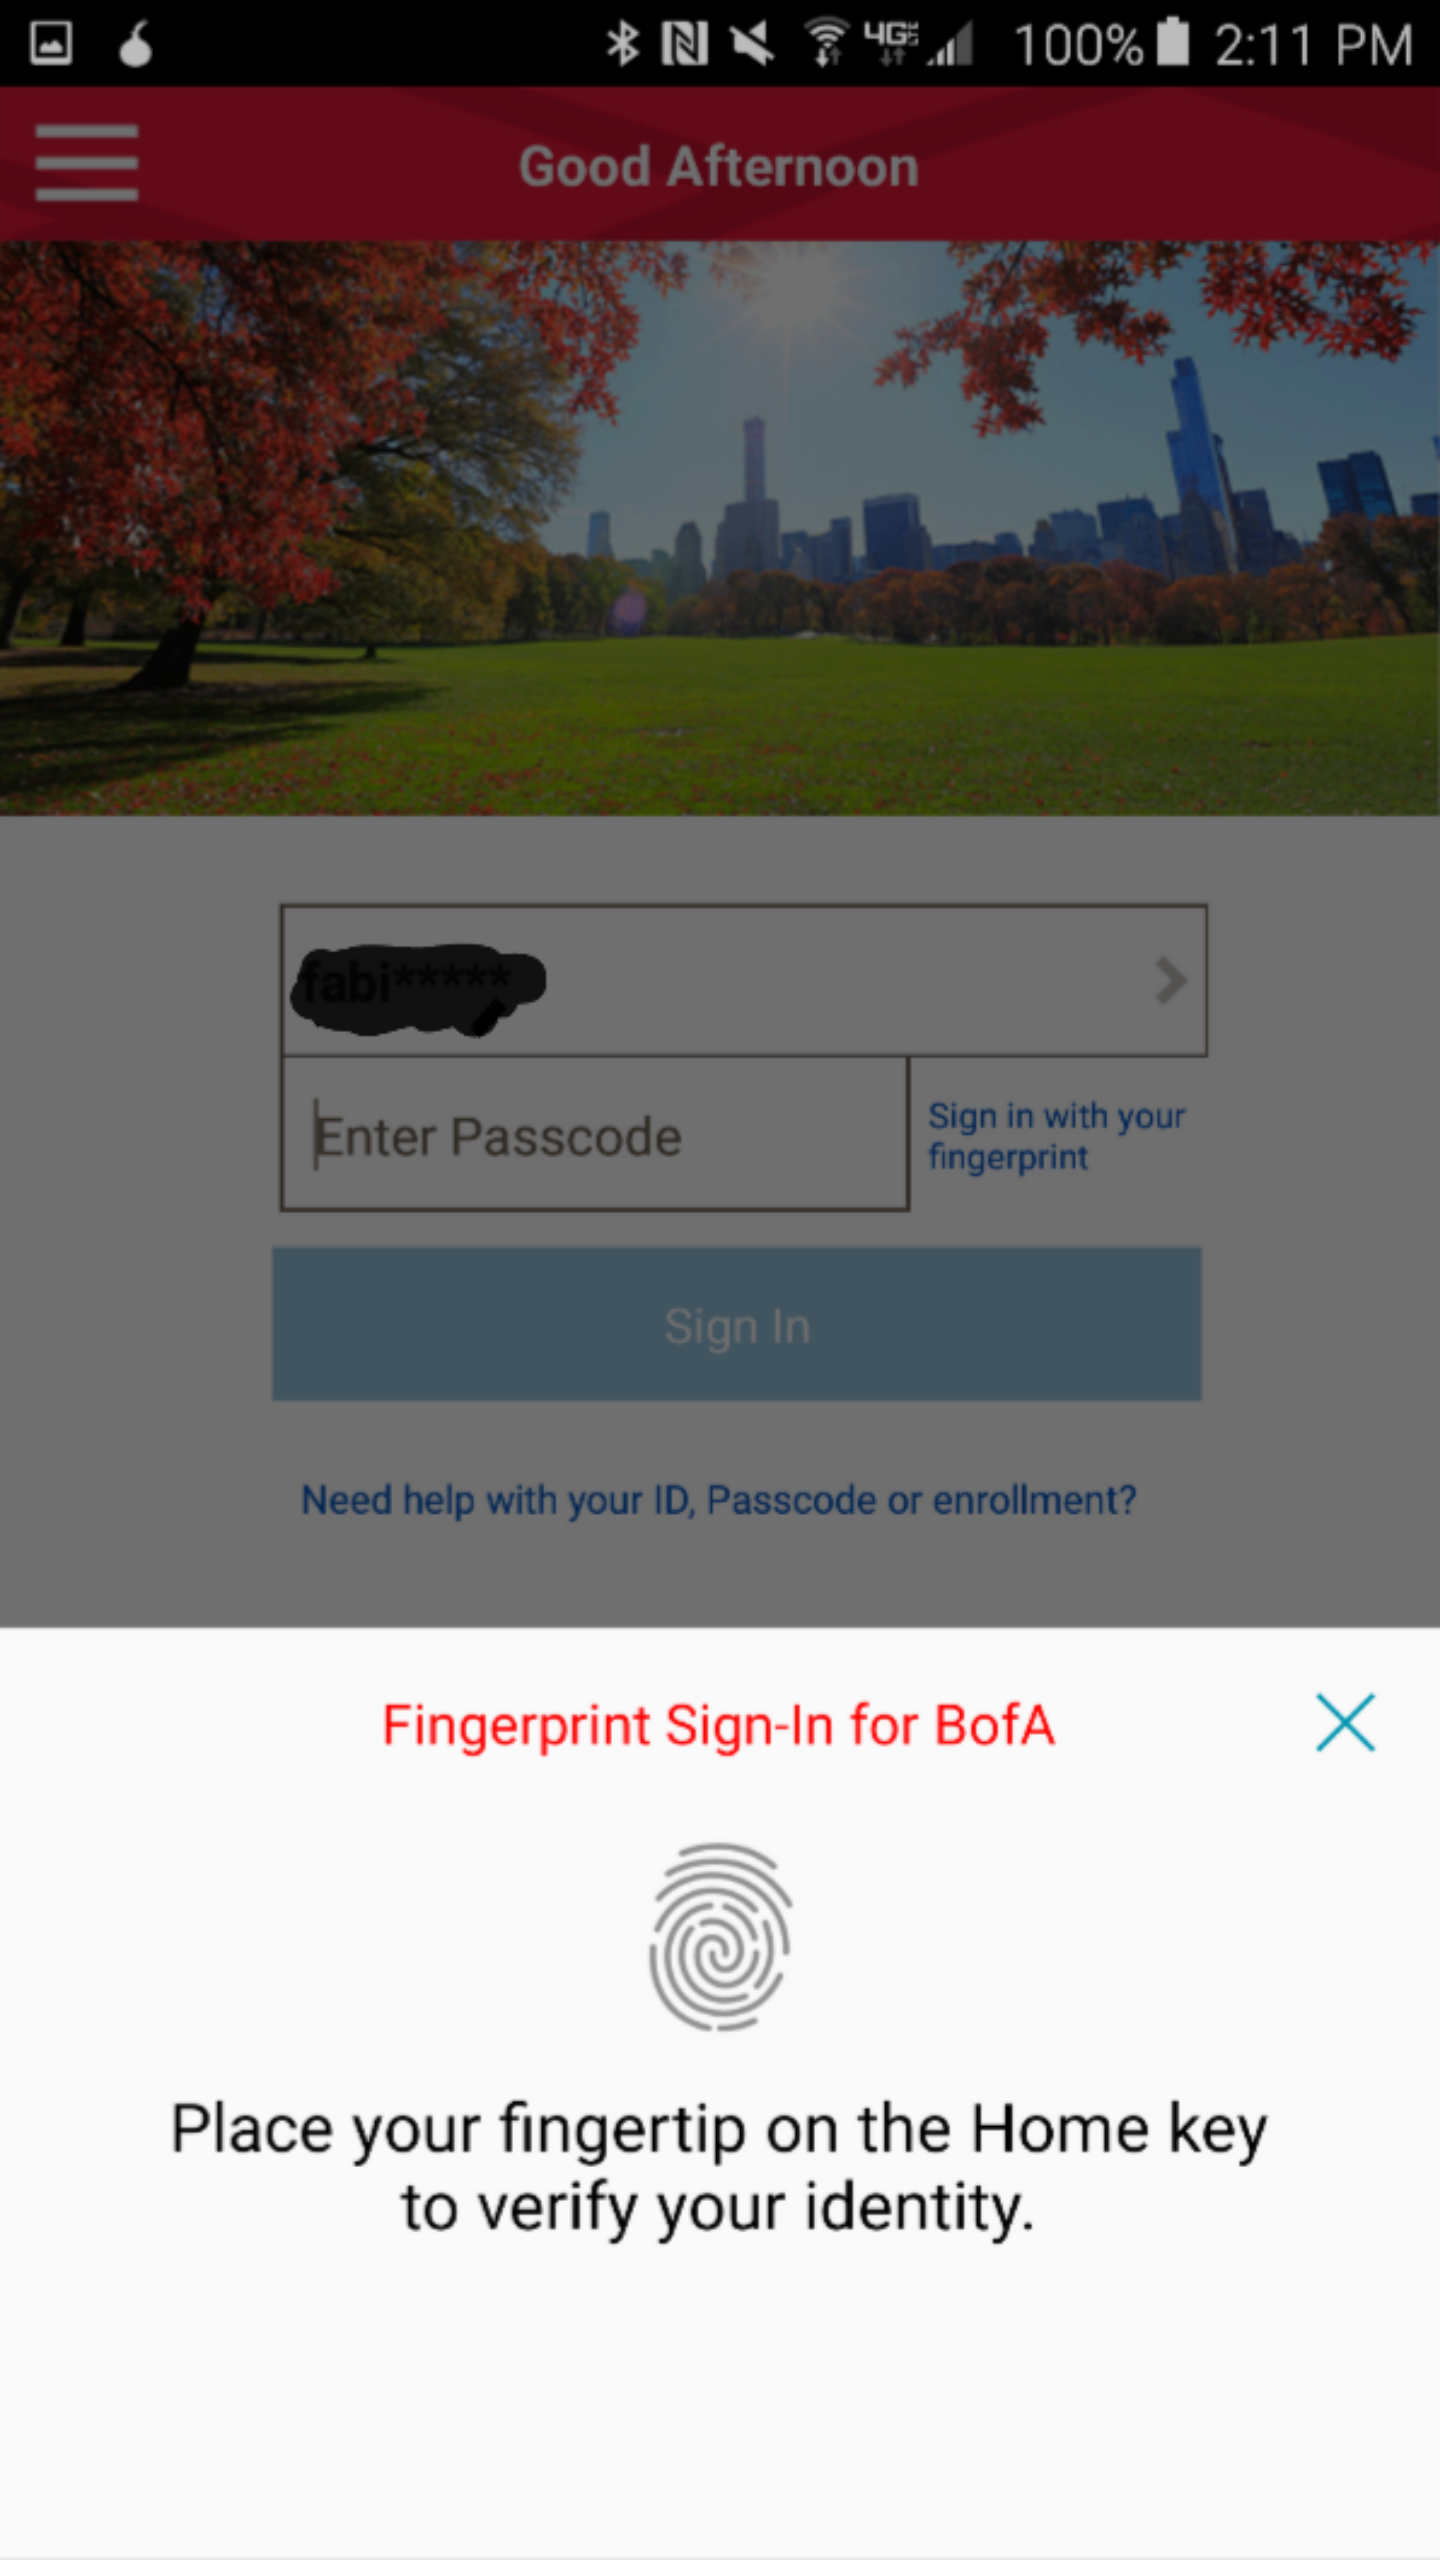 Bank of America mobile app supports Touch-ID, fingerprint readers on iOS, Android